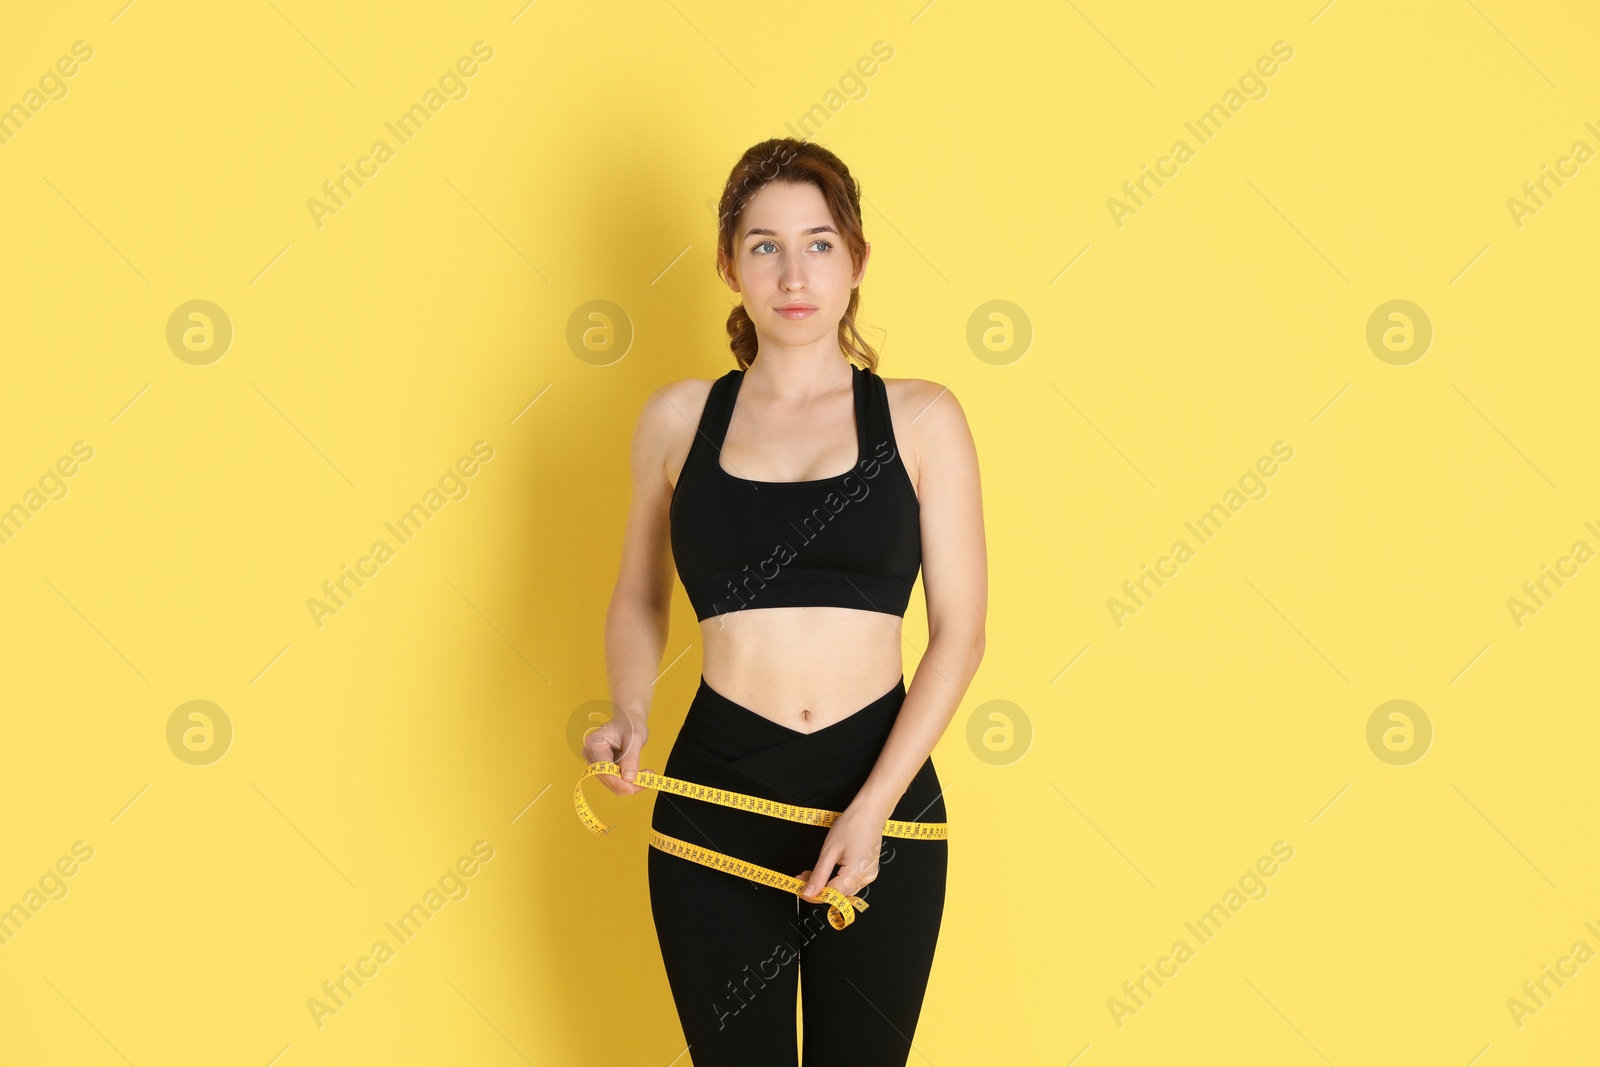 Photo of Woman with measuring tape showing her slim body against yellow background